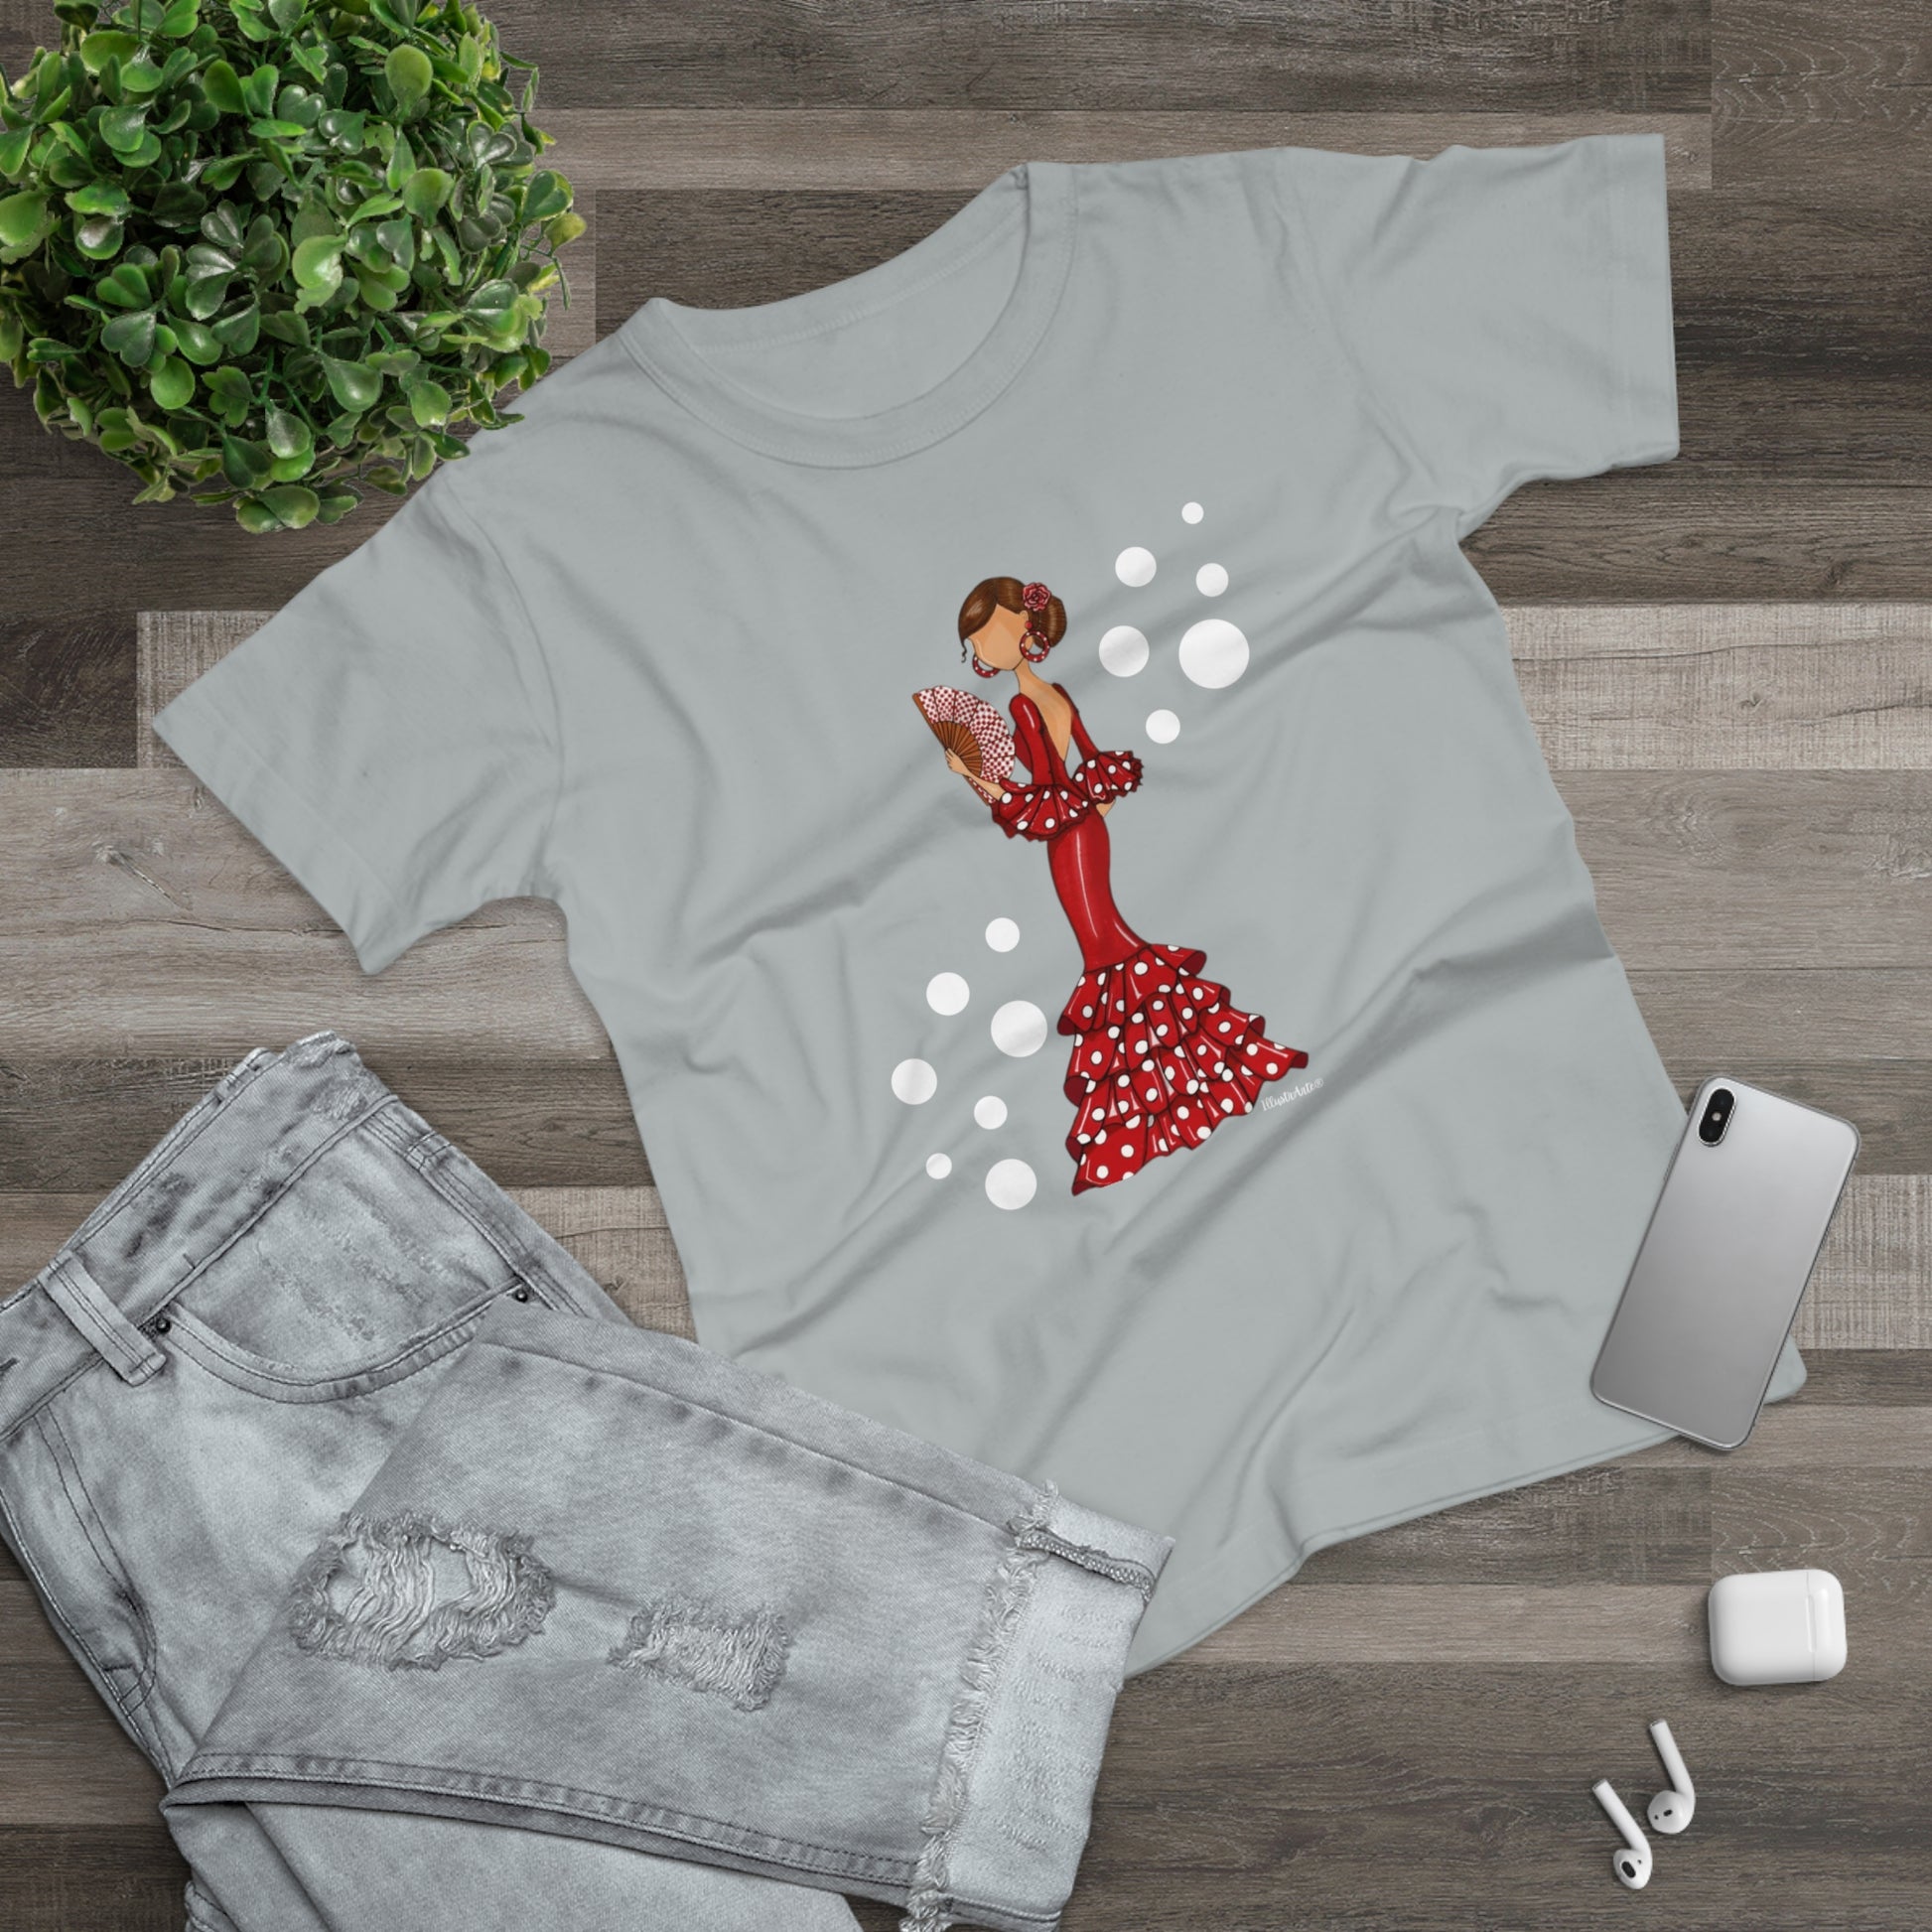 a t - shirt with a woman in a red dress on it